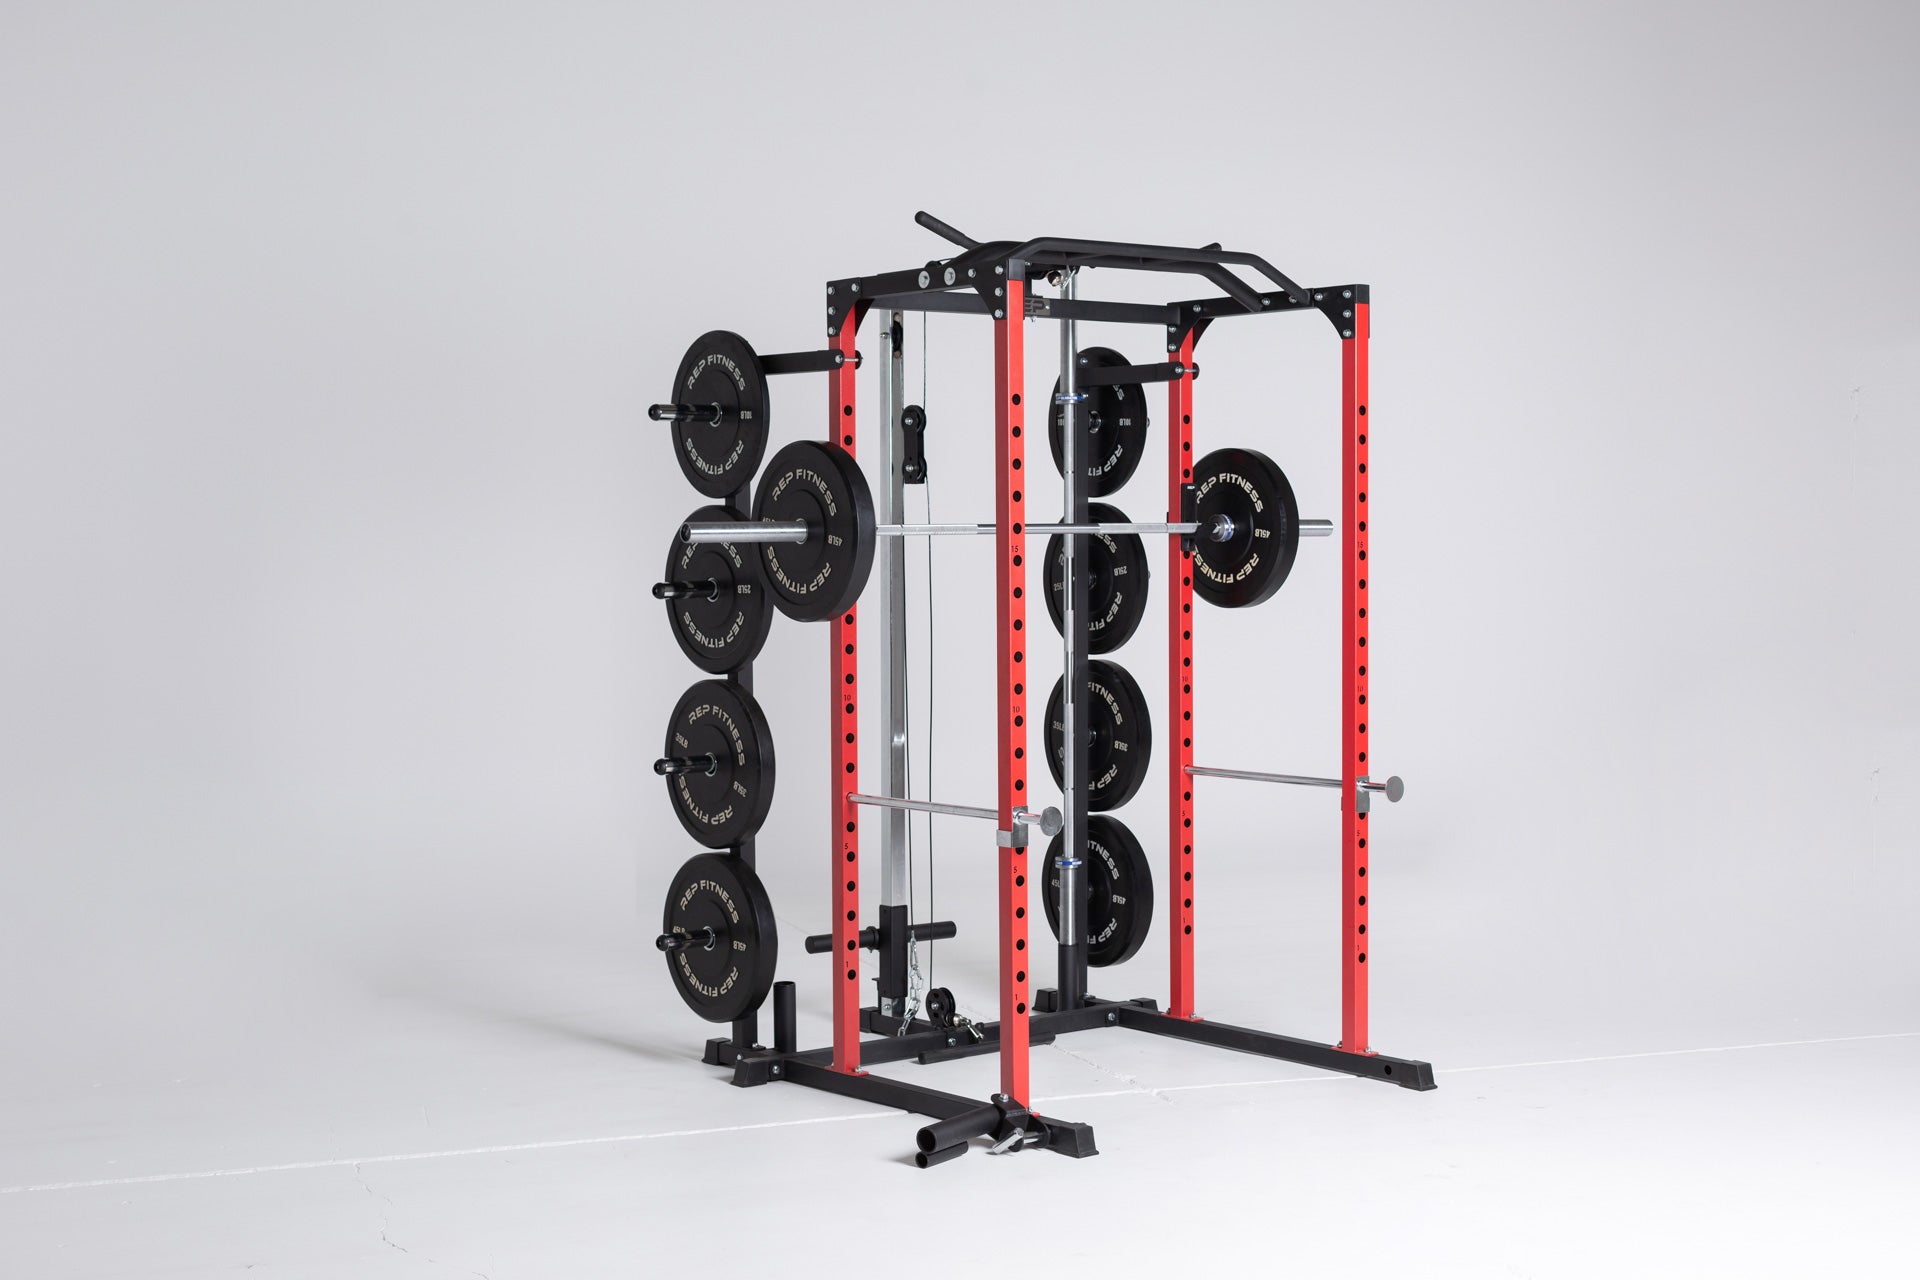 PR-1100 Power Rack with Lat Pulldown, Landmine Attachment, and Weight Storage